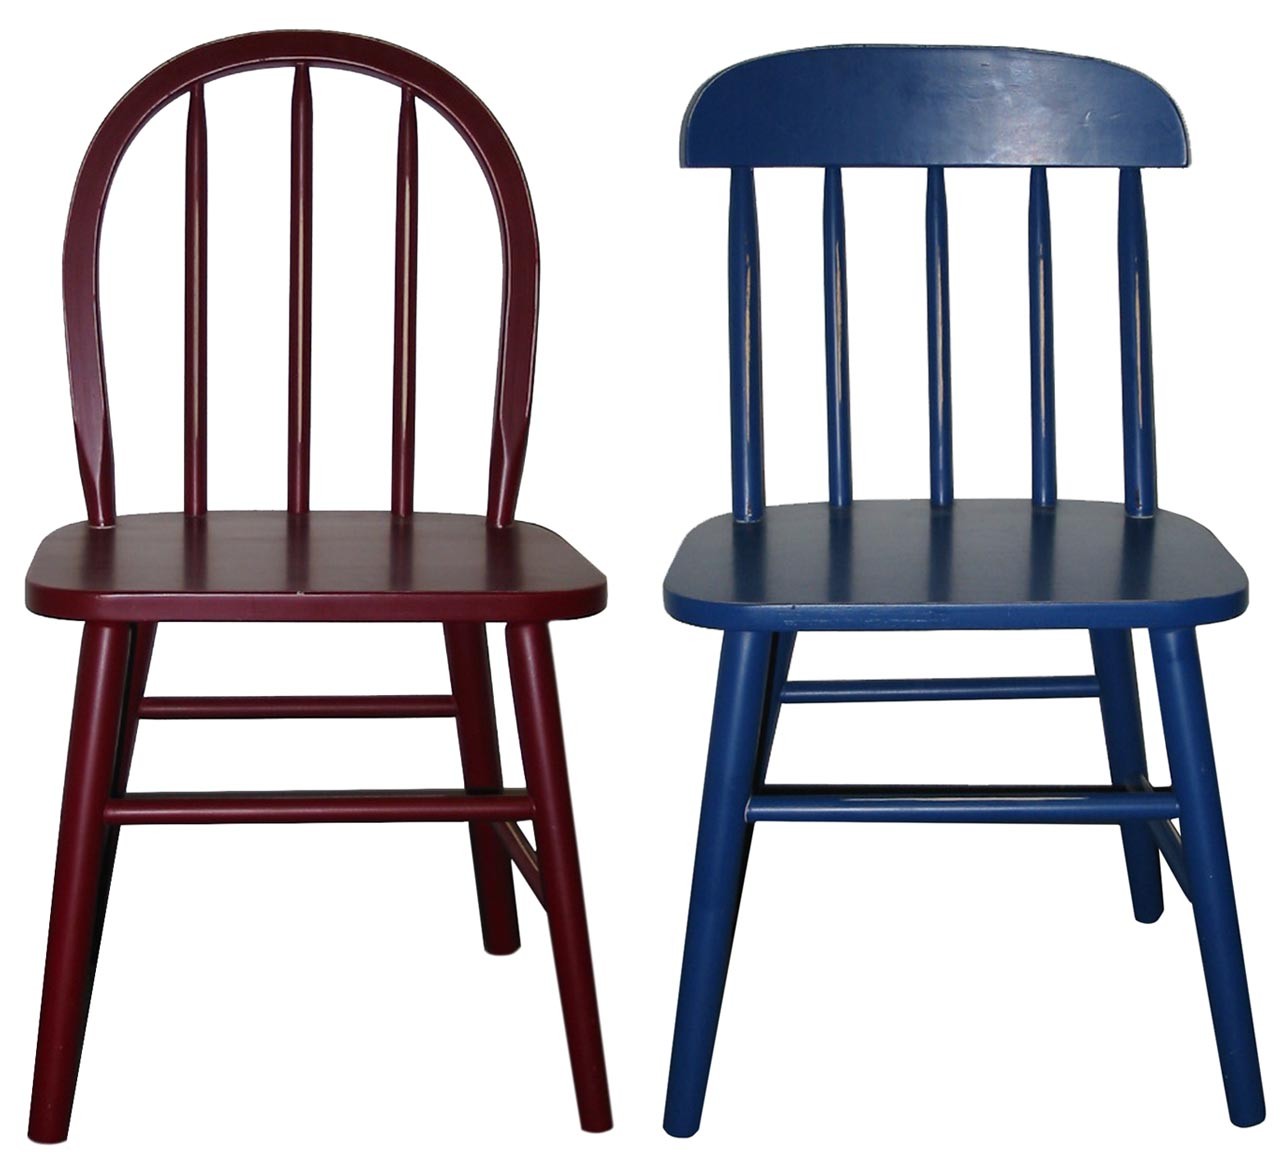 Cpsc The Land Of Nod Announce Recall Of Children S Wooden Chairs